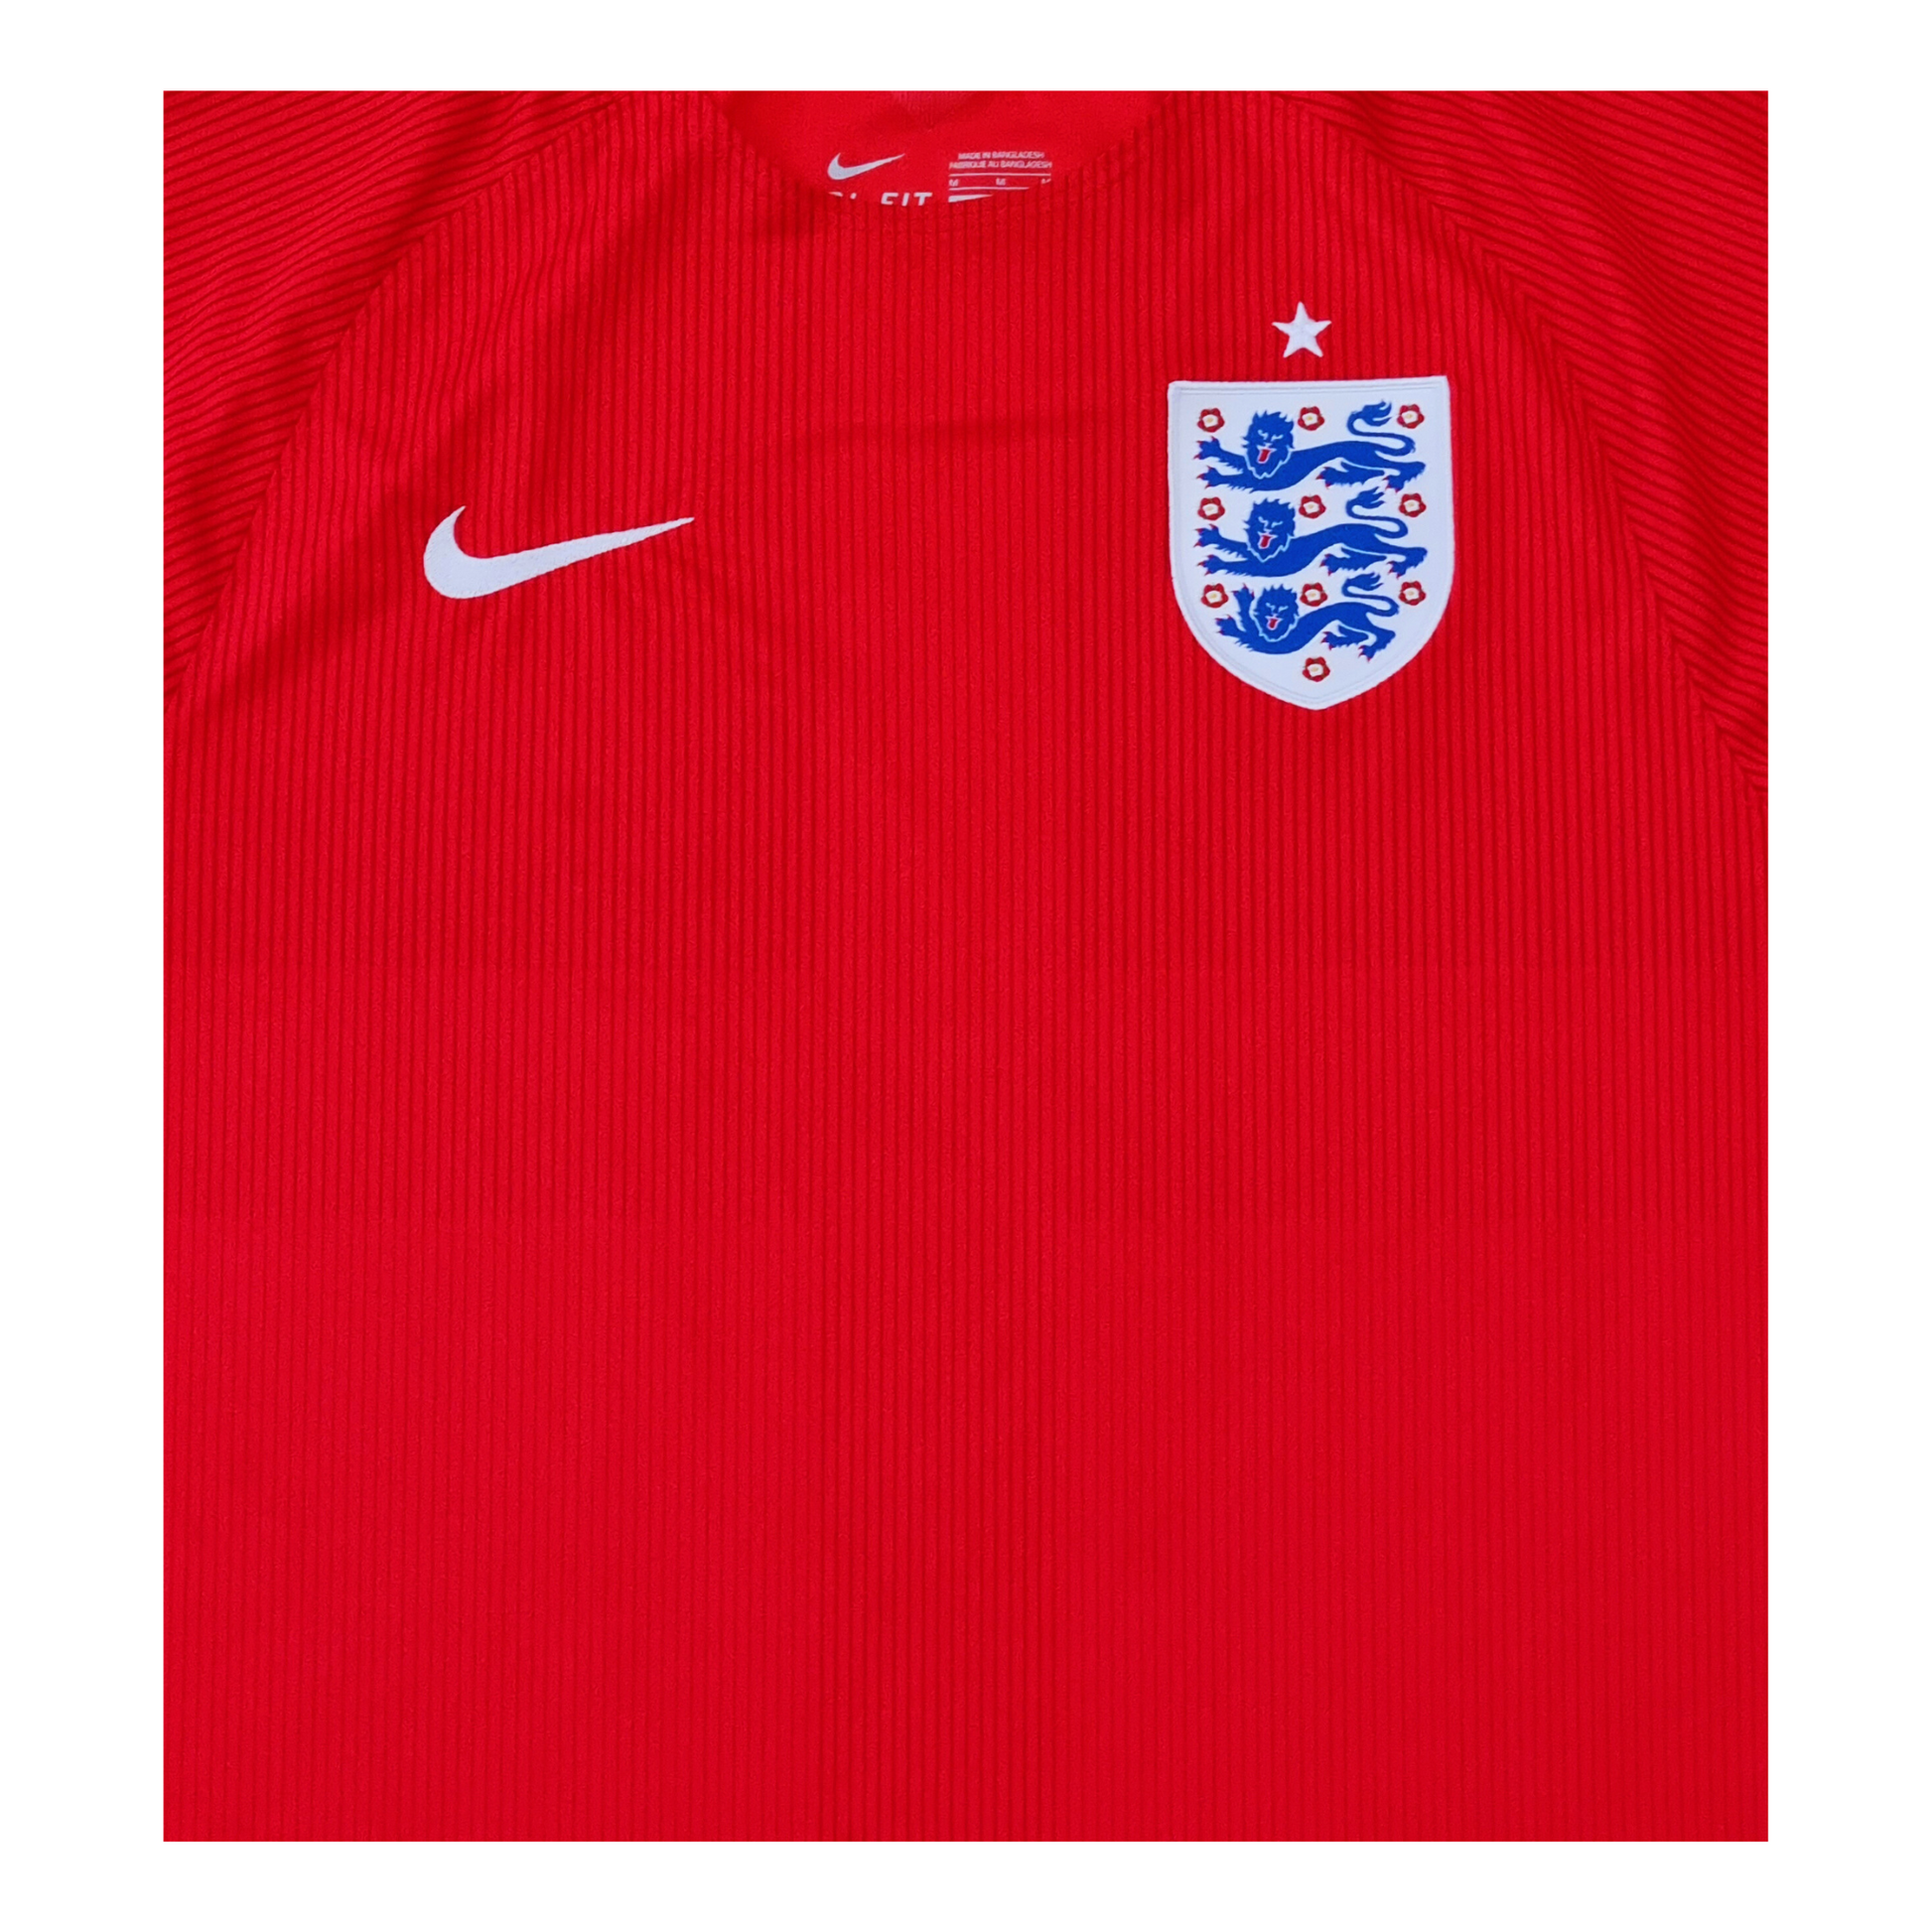 England 2014 Away Jersey - Nike. This small to medium-sized England 2014 Away Jersey by Nike is the ultimate fan gear for any true supporter of the England national team.